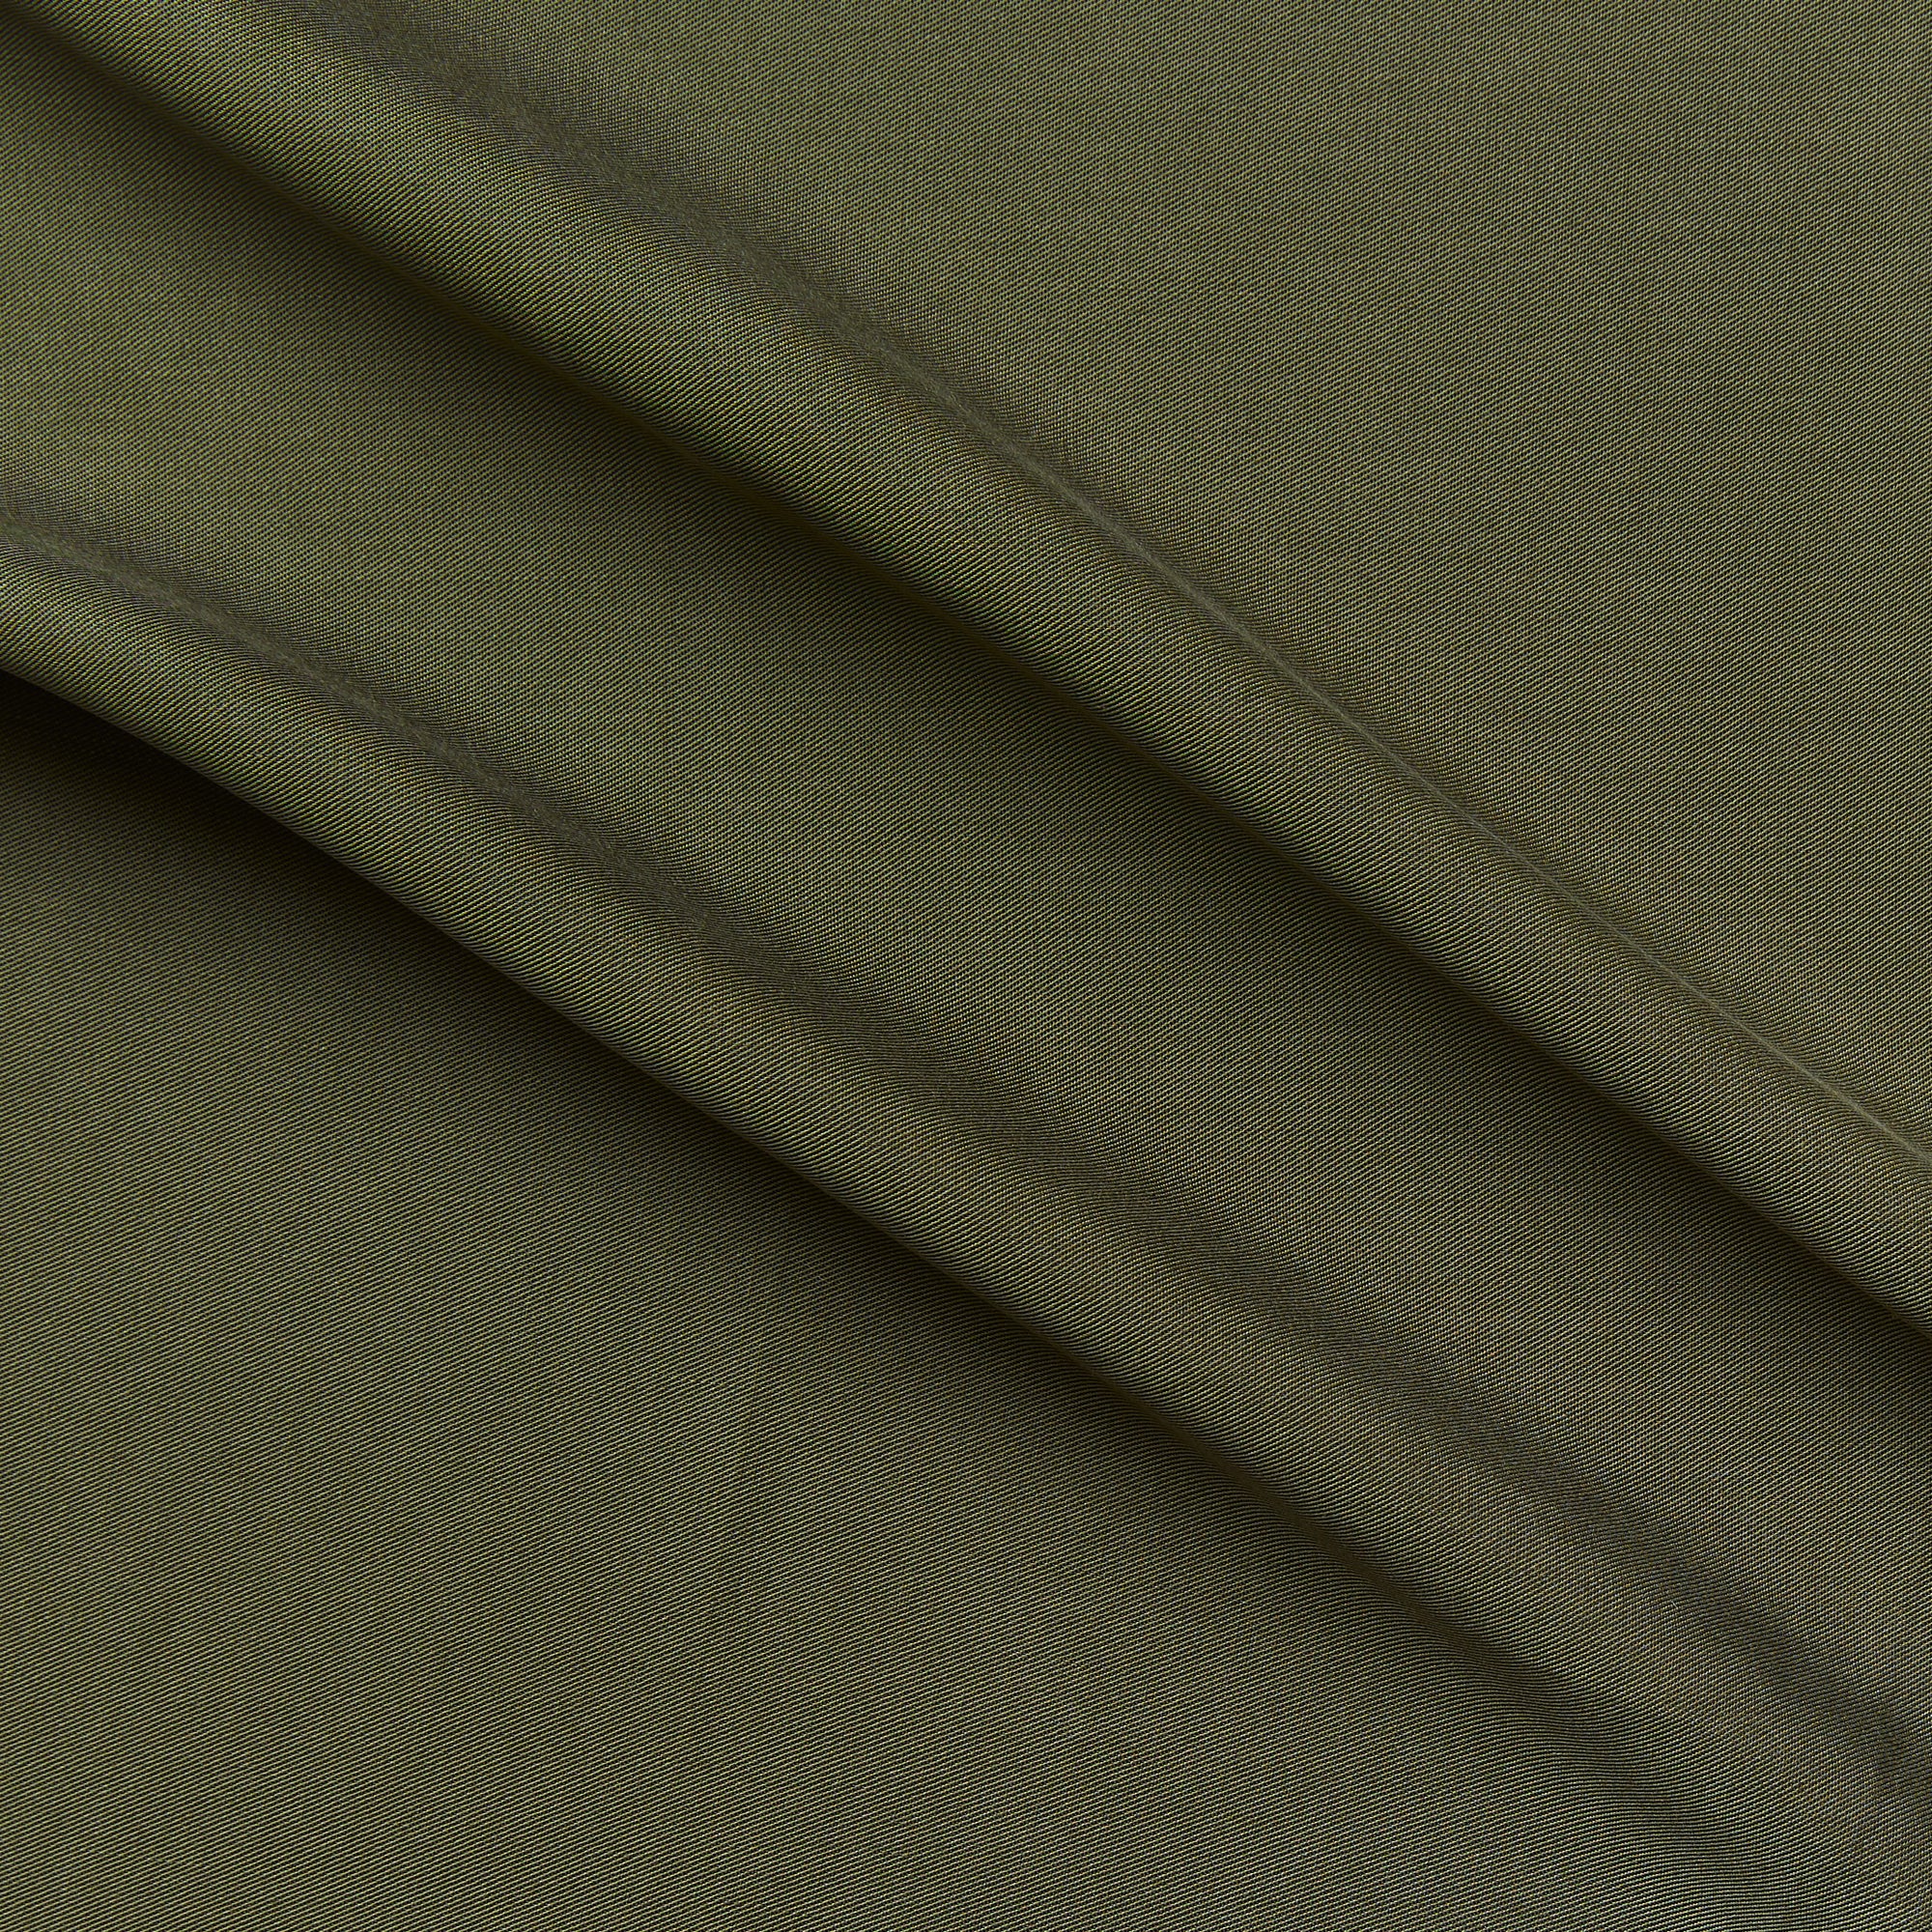 Displaying rampage a khaki colored fabrics that is soft with subtle lustre pure tencel featuring twill weave